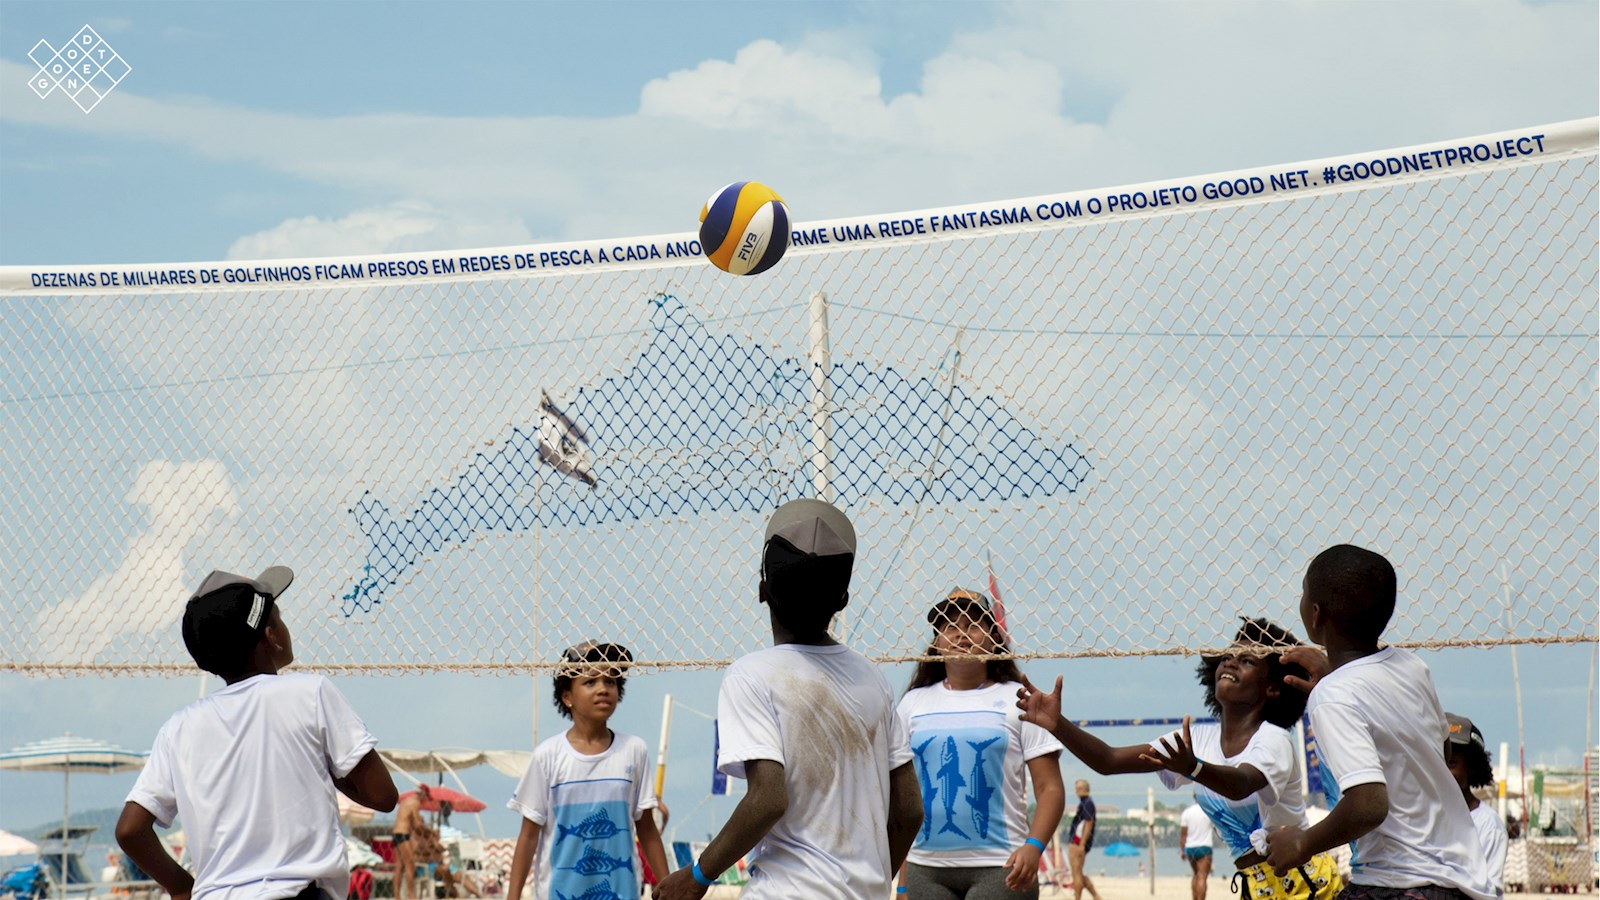 Children playing volleyball with a Good Net project net